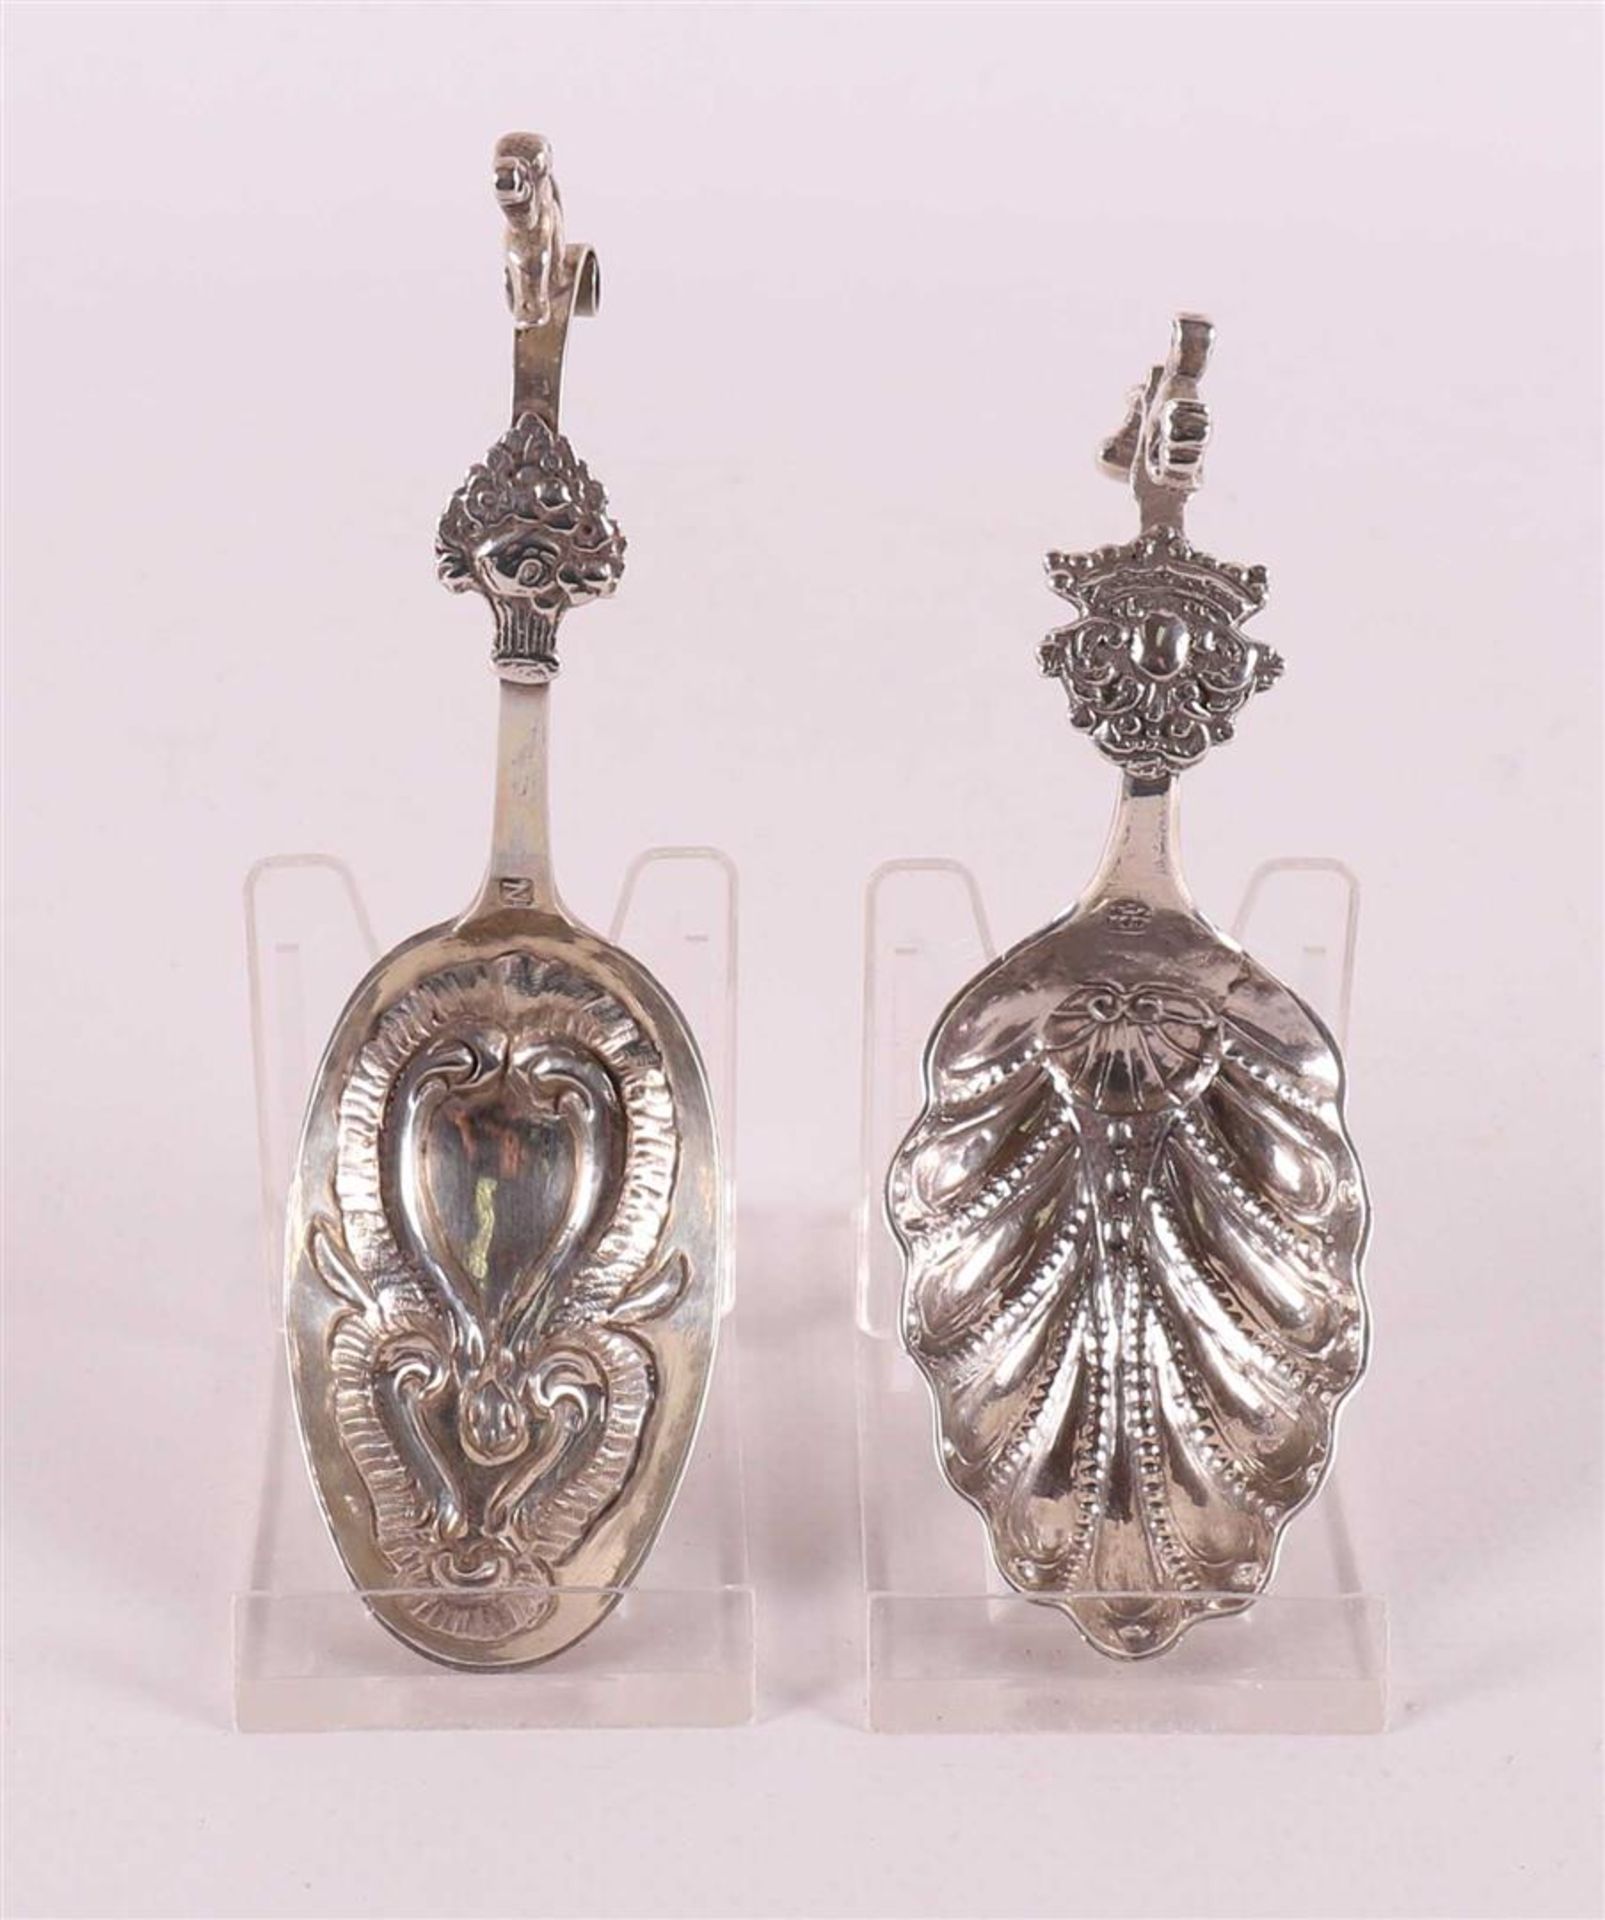 Two silver cream spoons, Friesland, 18th century.